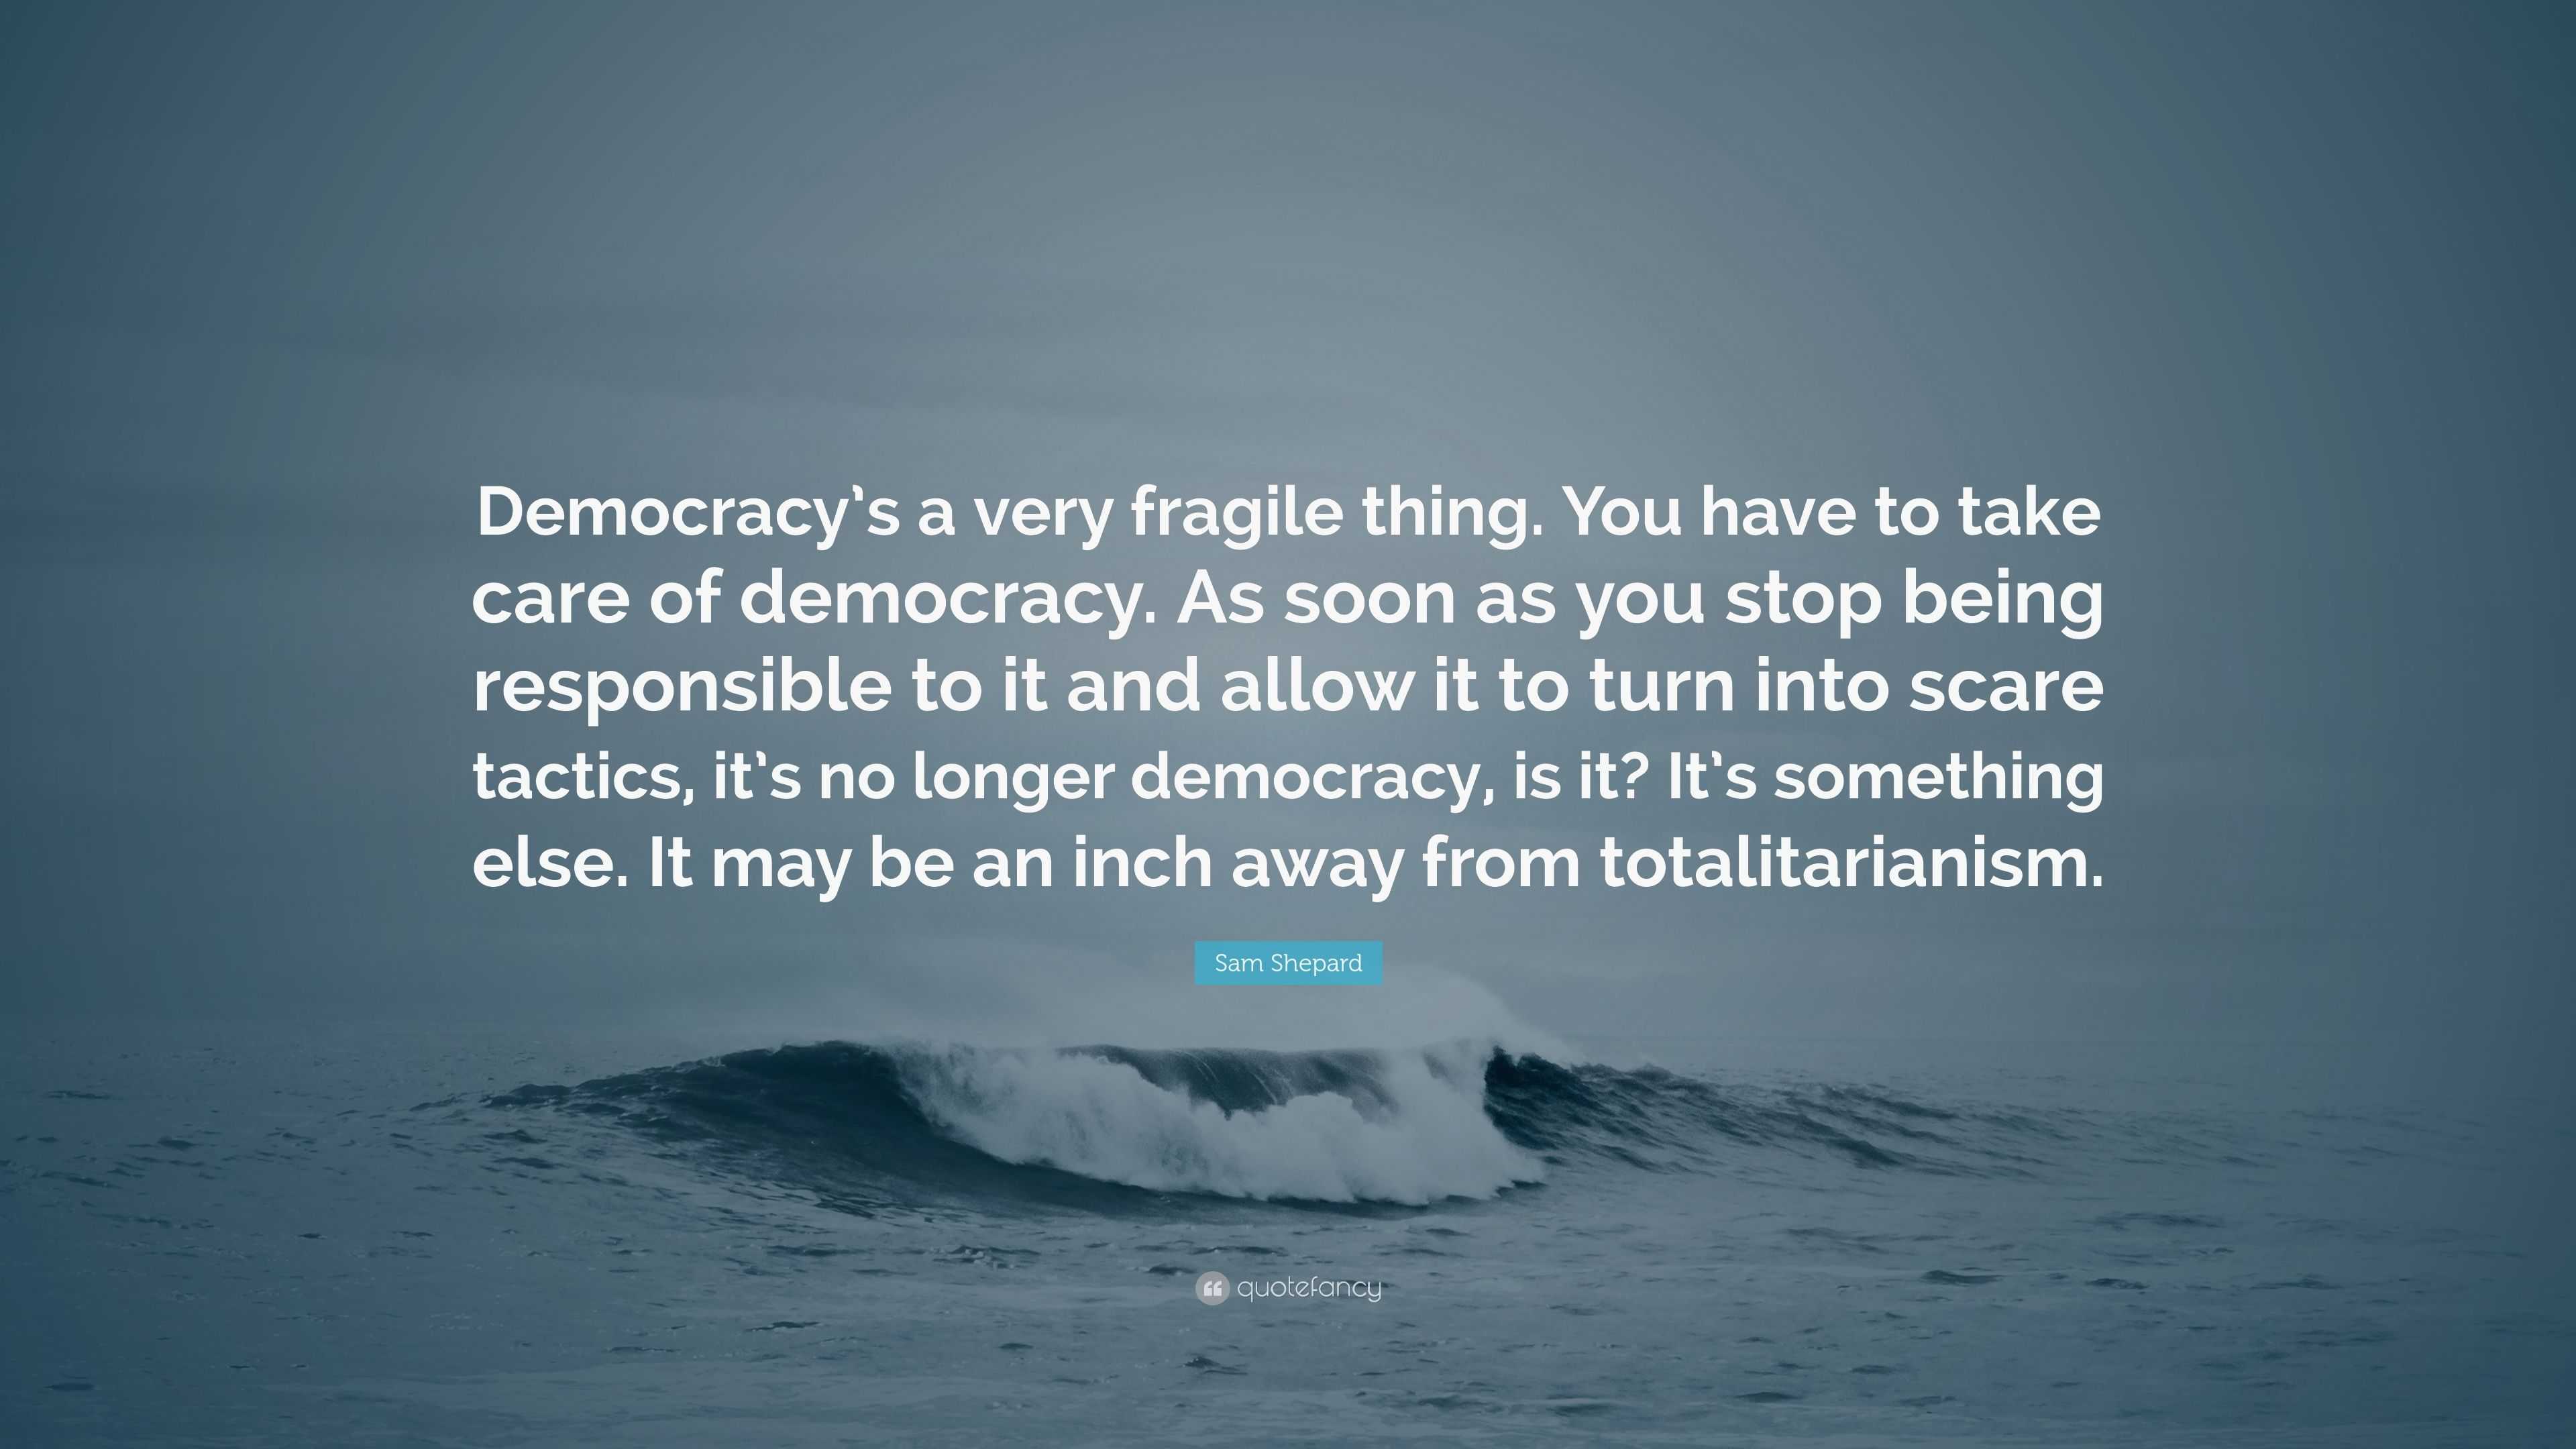 Sam Shepard Quote: “Democracy’s a very fragile thing. You have to take